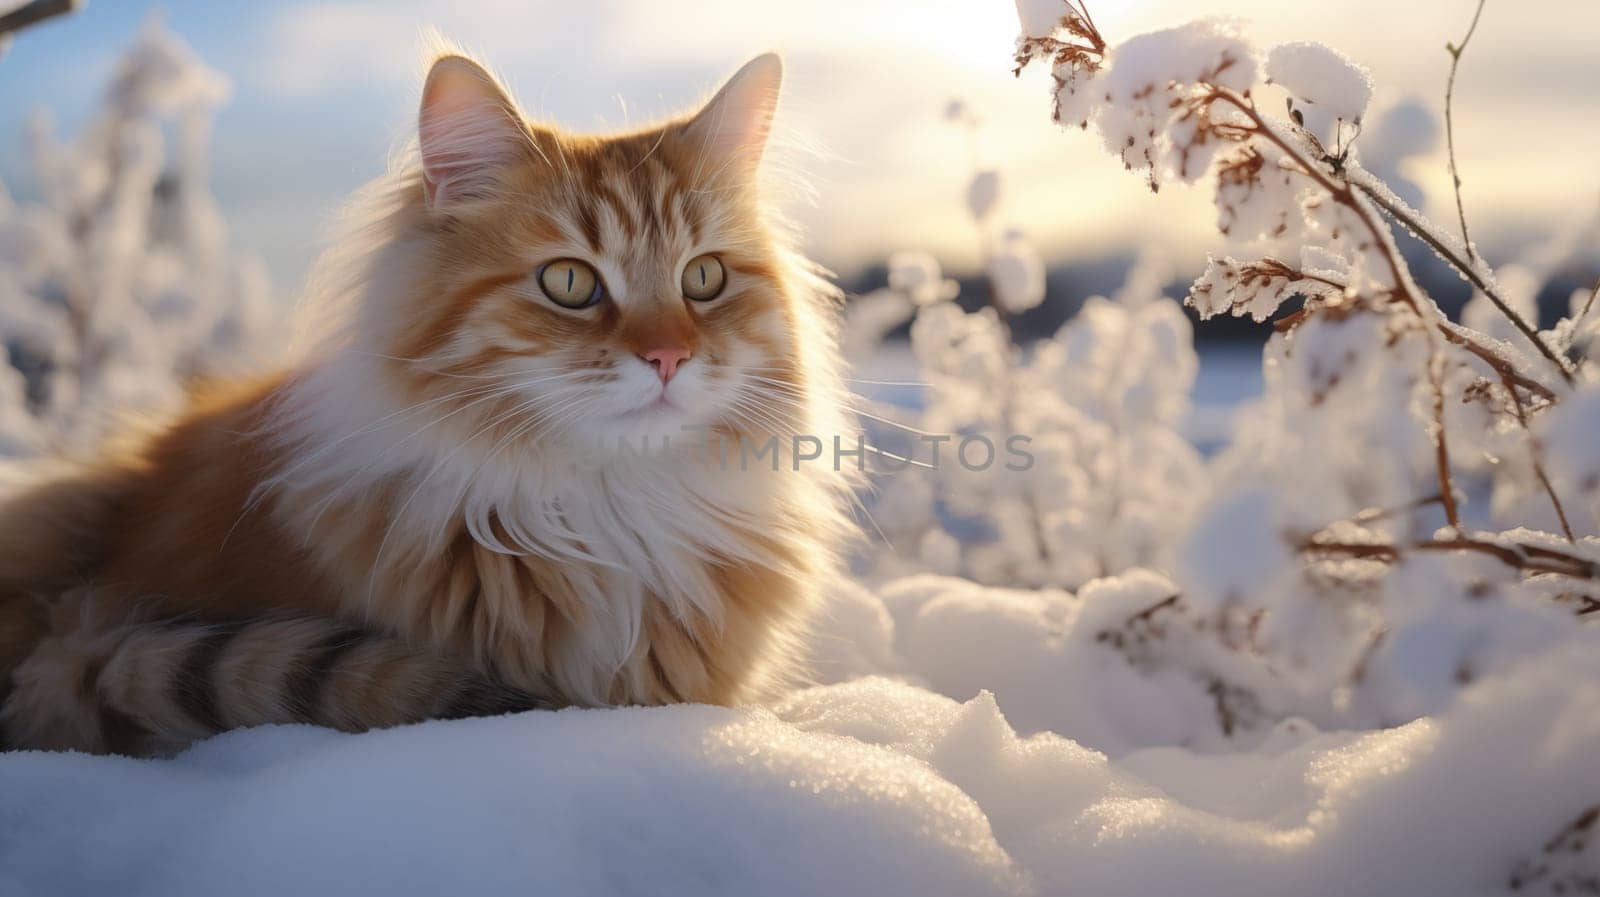 Adorable, ginger fluffy cat sitting on the snow in winter, in a winter landscape. Looking away